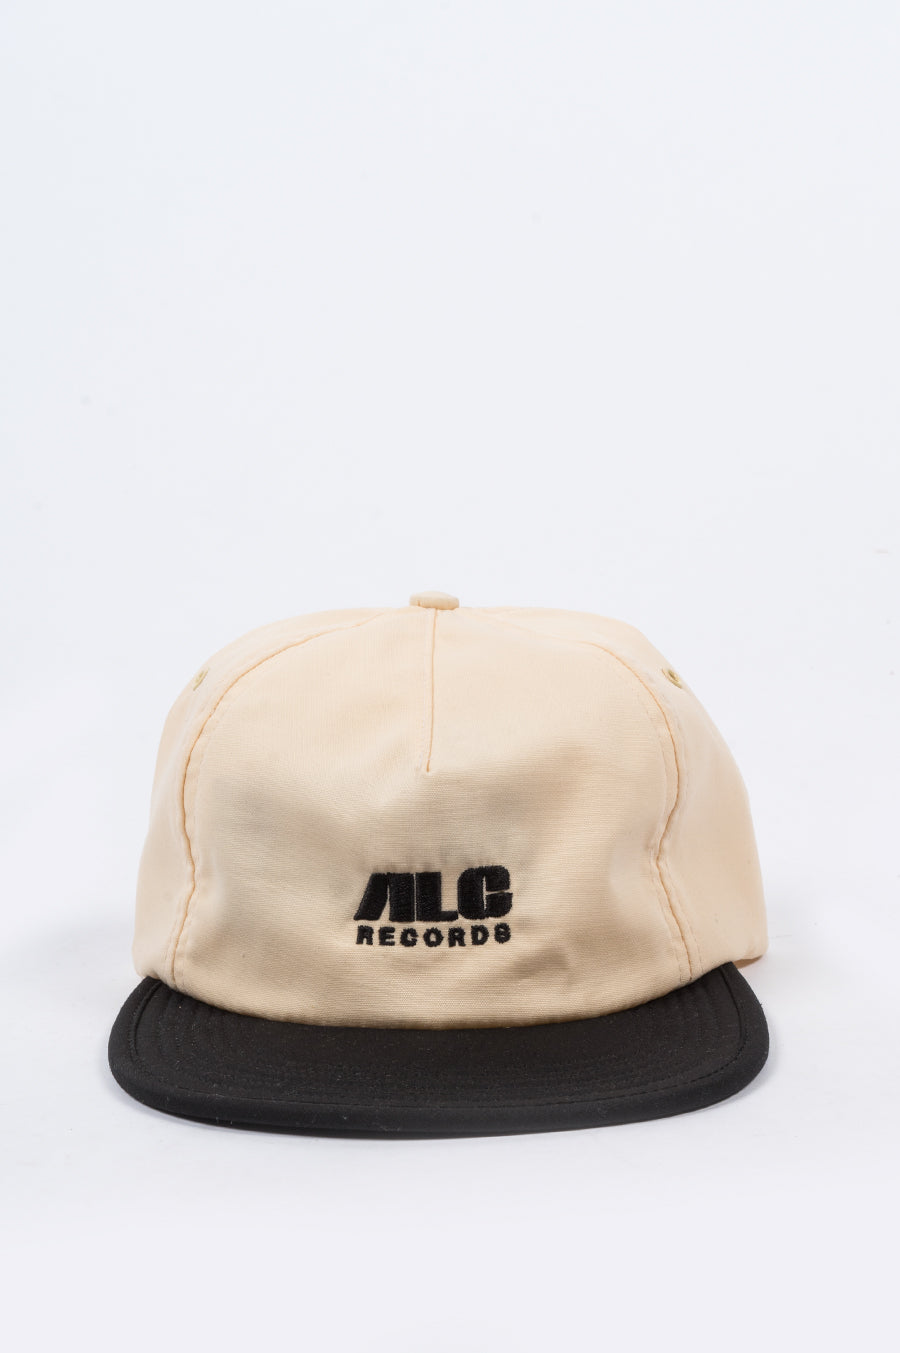 REAL BAD MAN X ALCHEMIST WASHED OUT 6 PANEL HAT PEACH BLACK - BLENDS